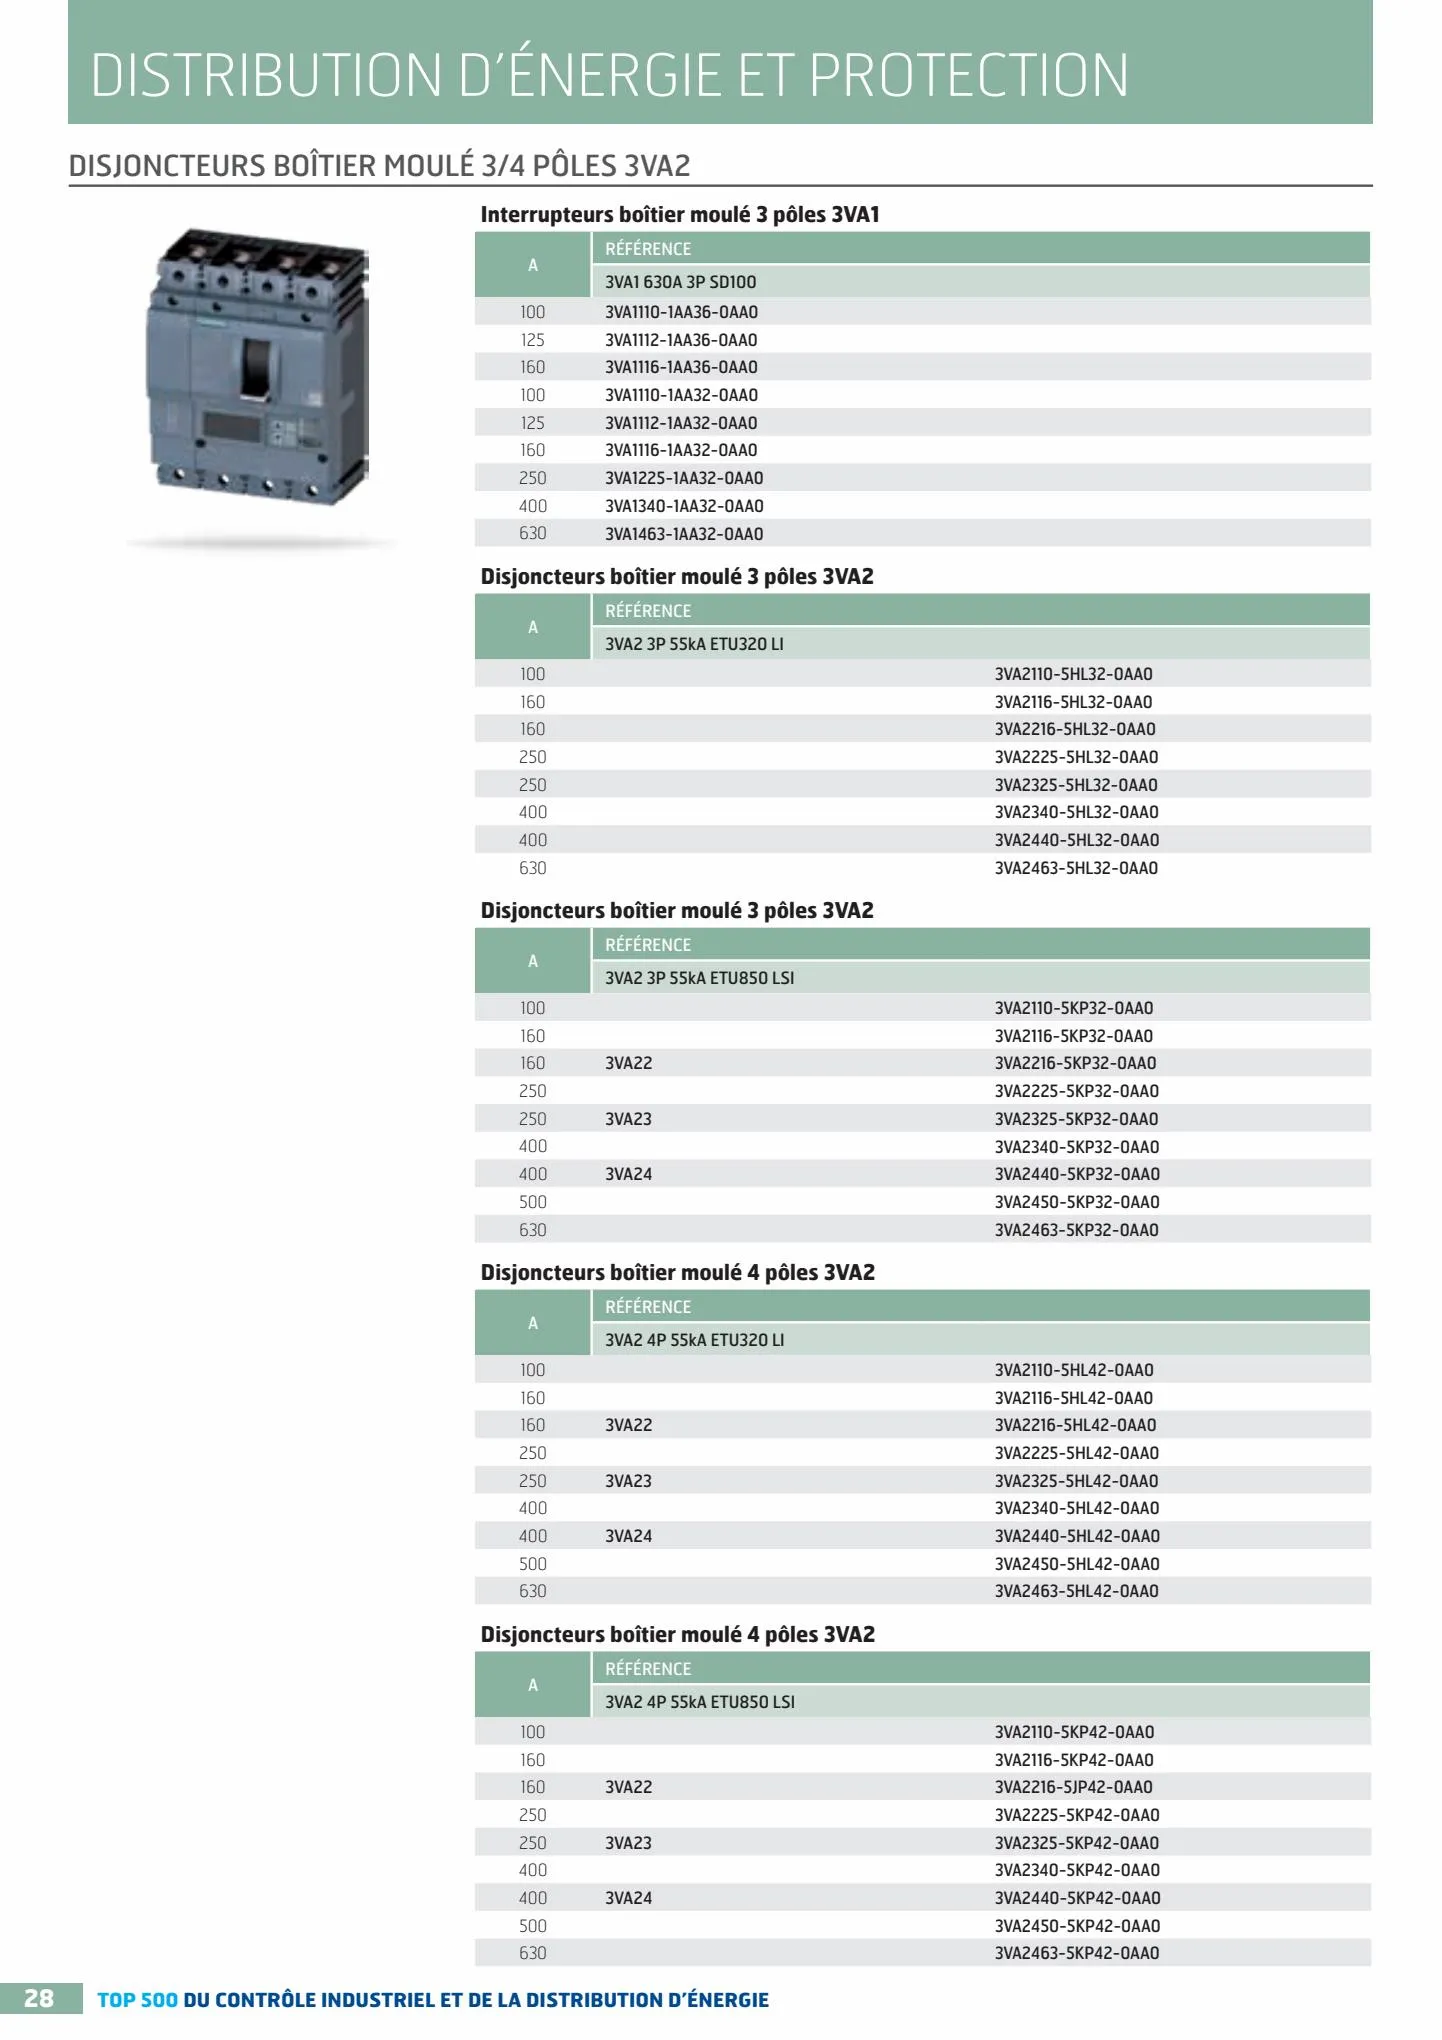 Catalogue TOP 500 siemens, page 00028